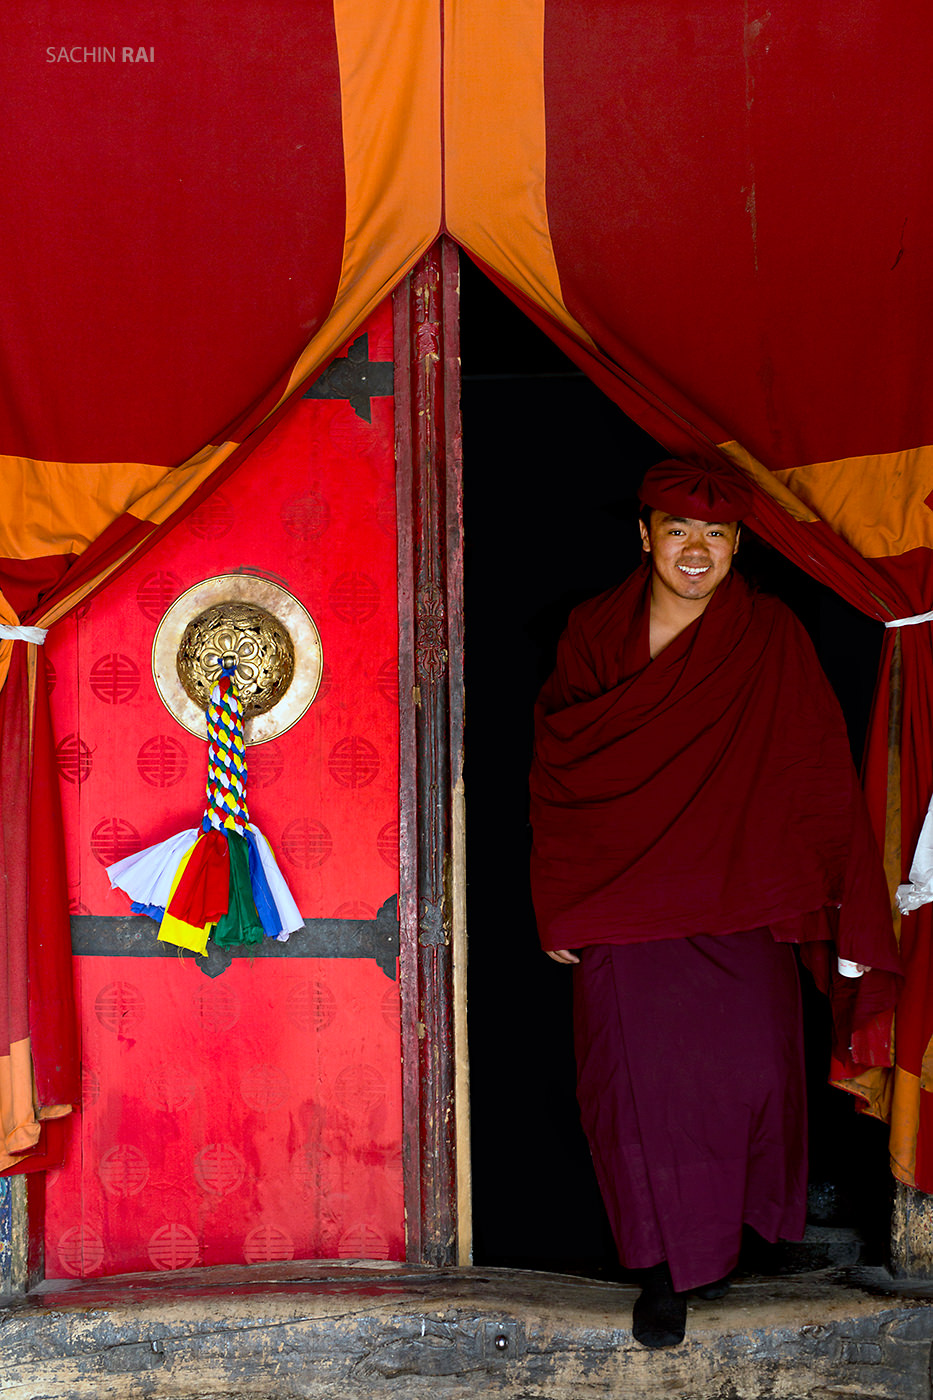 A monk stepping out of a monastery in Ladakh, India.